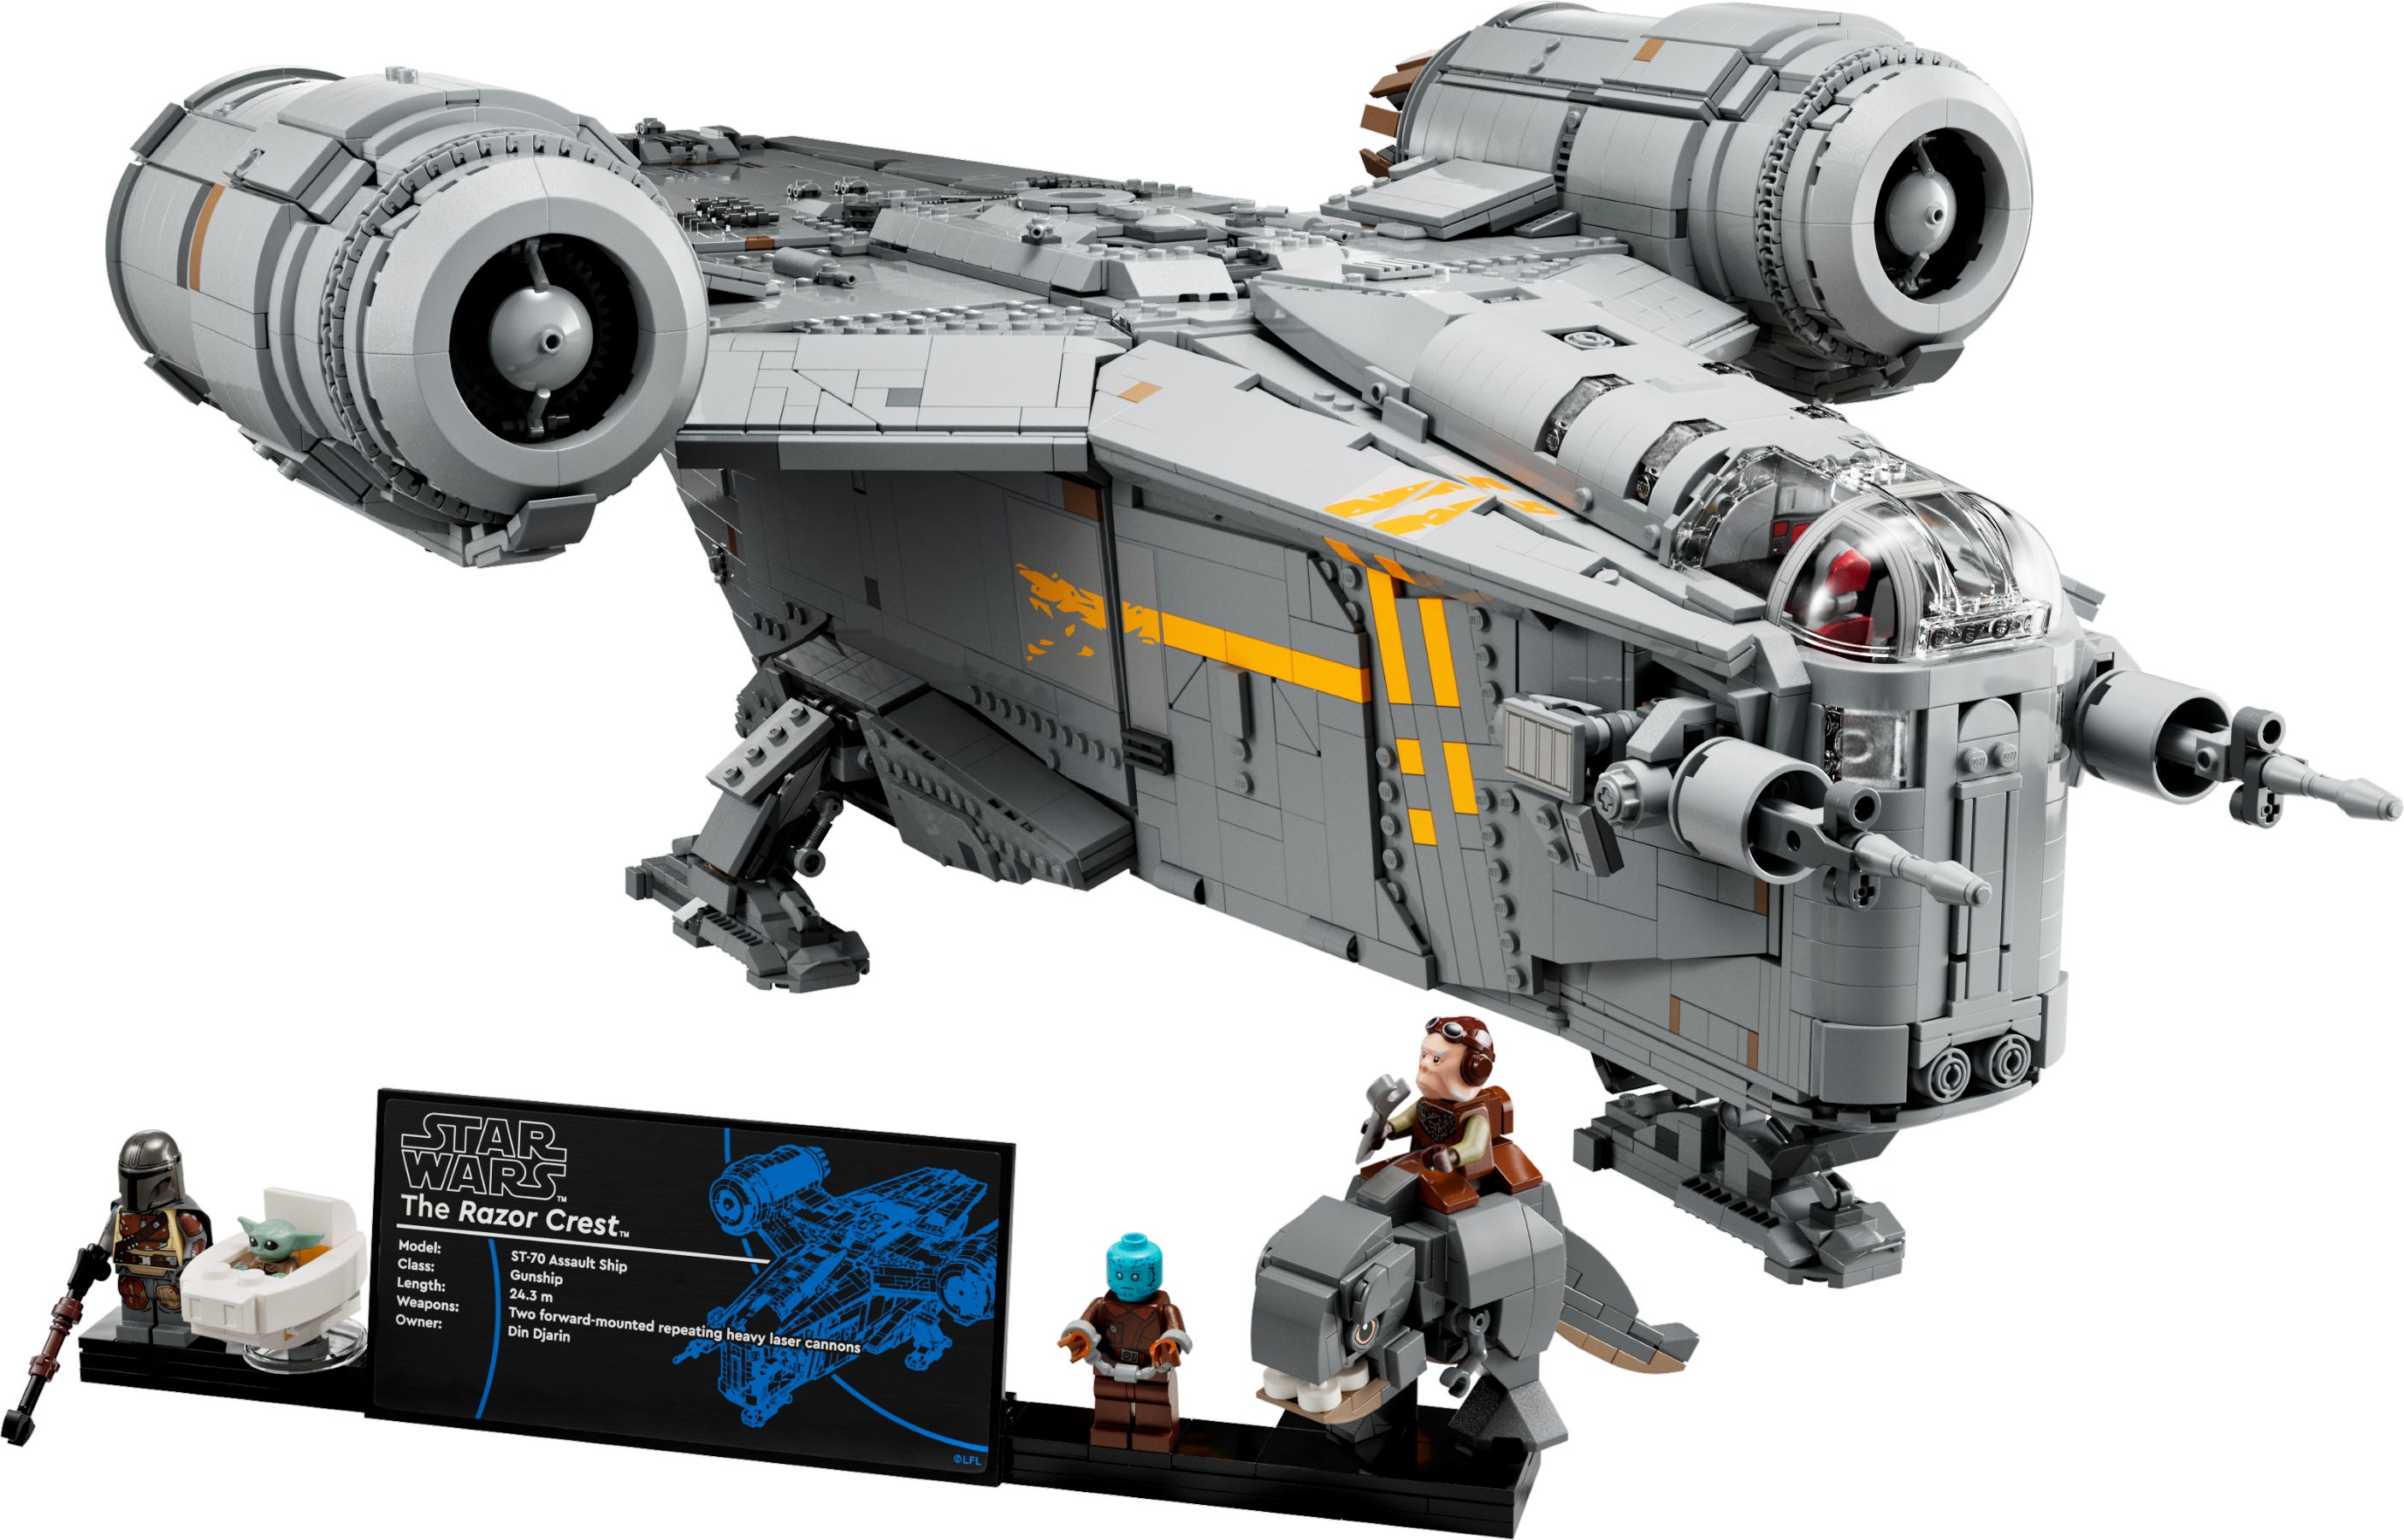 Every LEGO Star Wars set retiring 2023 and beyond January